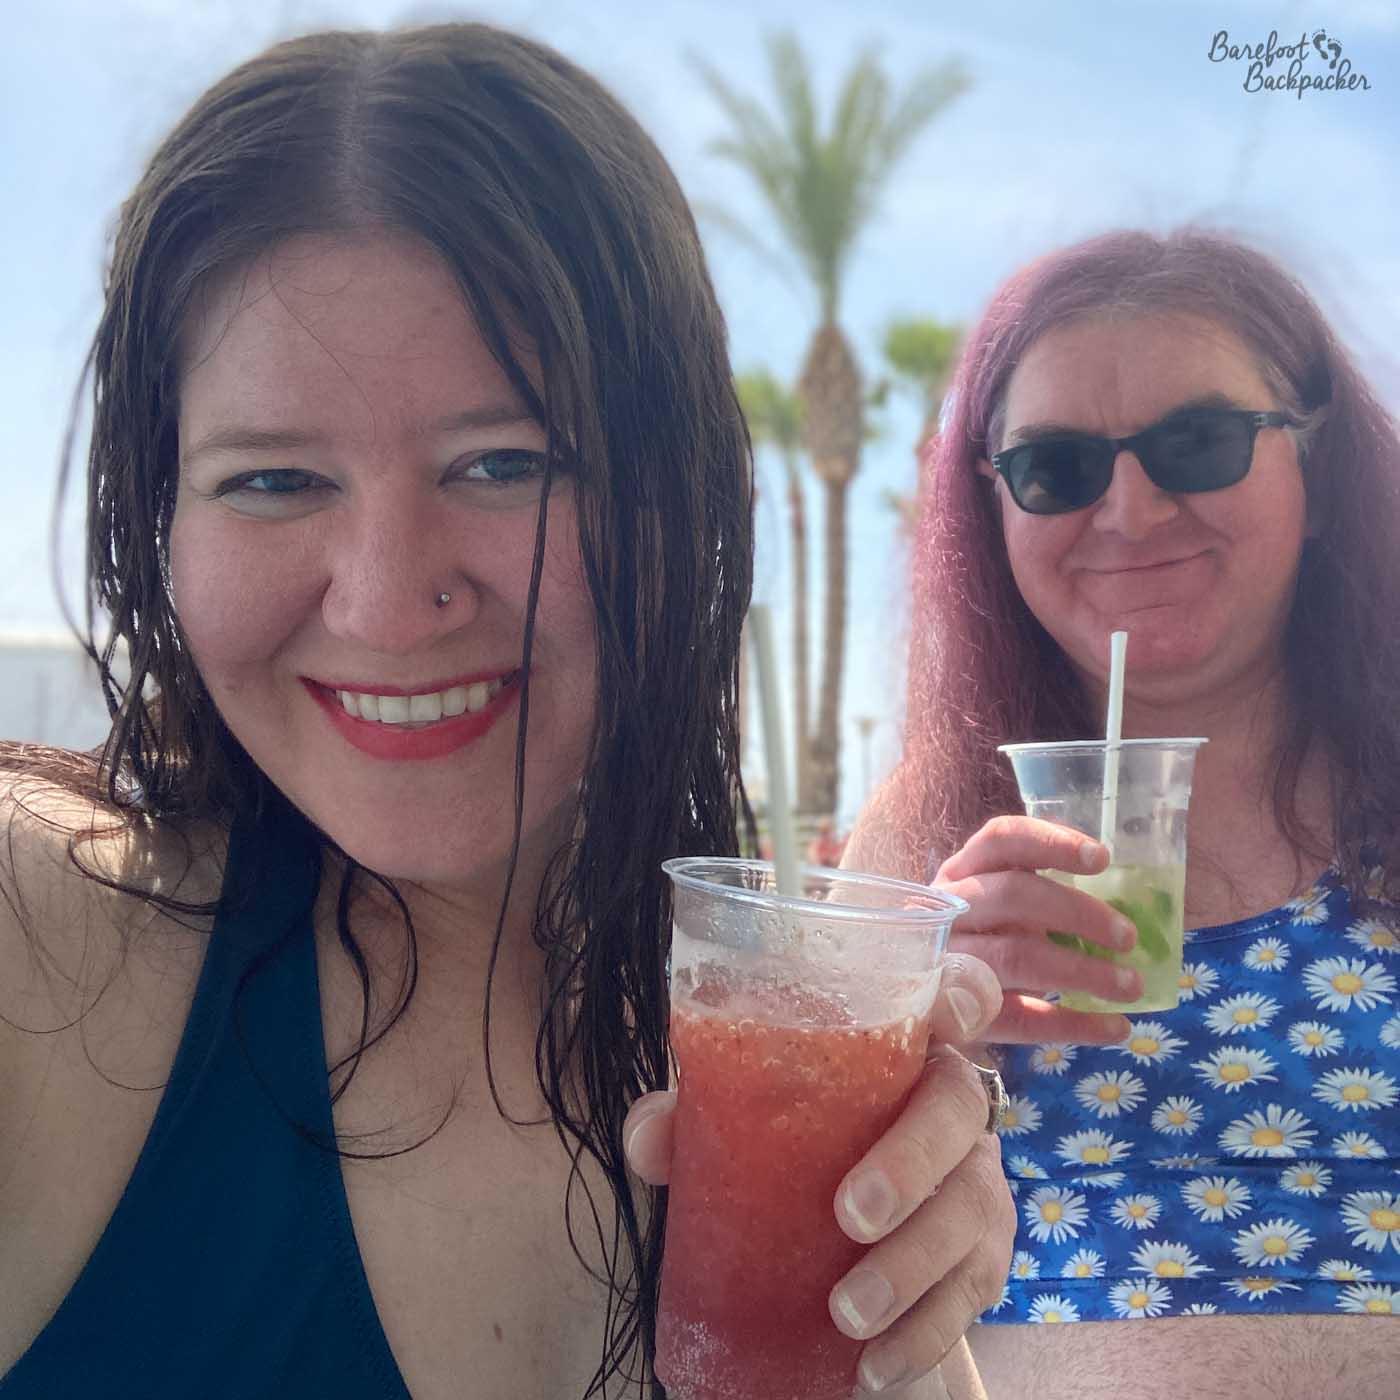 Two people take up most of the shot. They are both holding cocktails. The person on the left is a woman with long straight damp hair and a nose-ring. The person on the right (an enby) is wearing sunglasses, a daisy-motif crop-top, and long purple-ish hair.